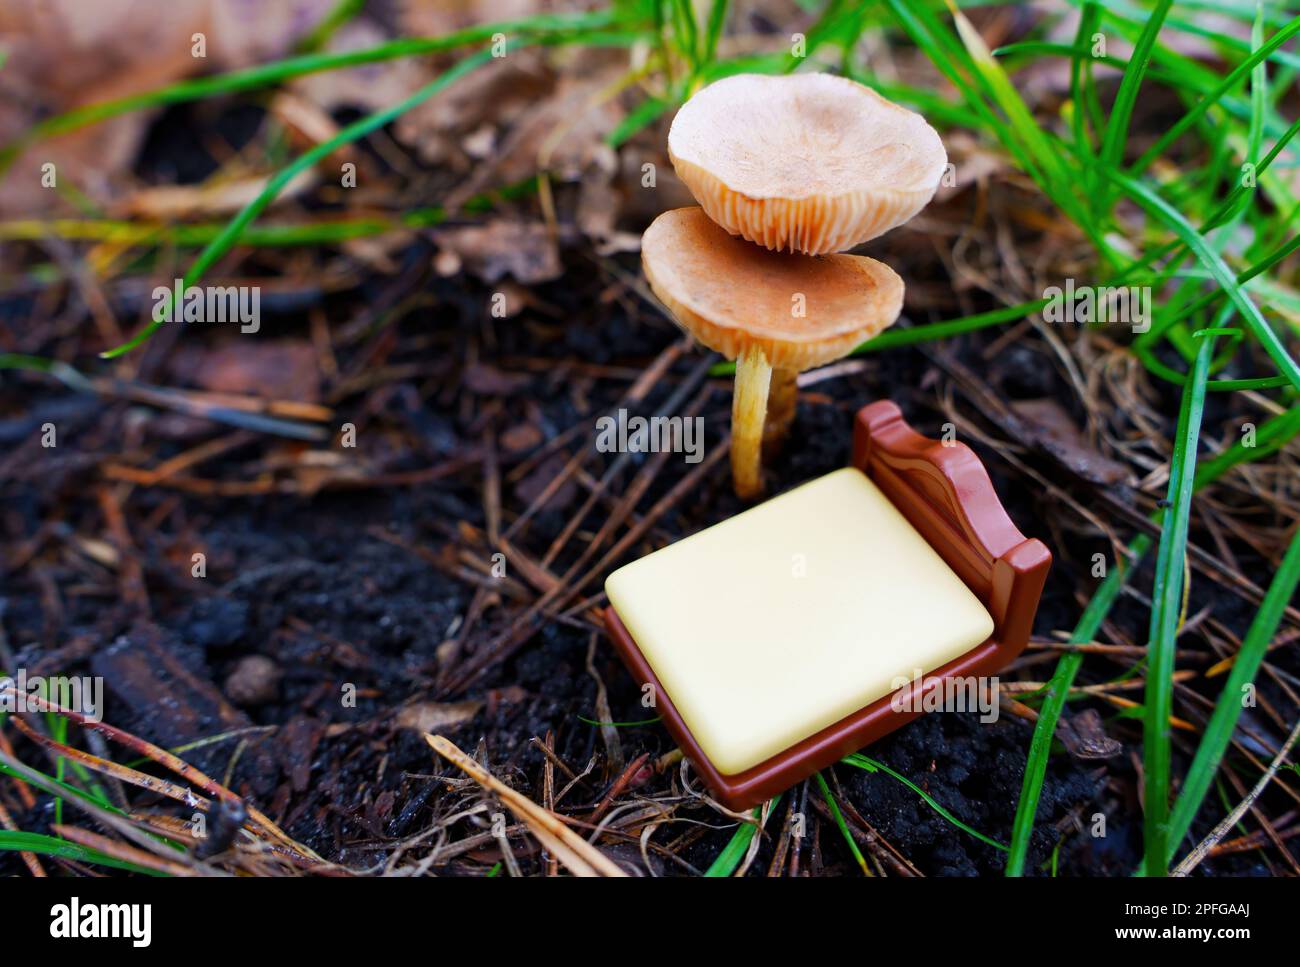 Lost in a Dream: Tiny toy bed is placed under a canopy of mushrooms in the woods. Exploring the mysteries of the subconscious mind. Stock Photo